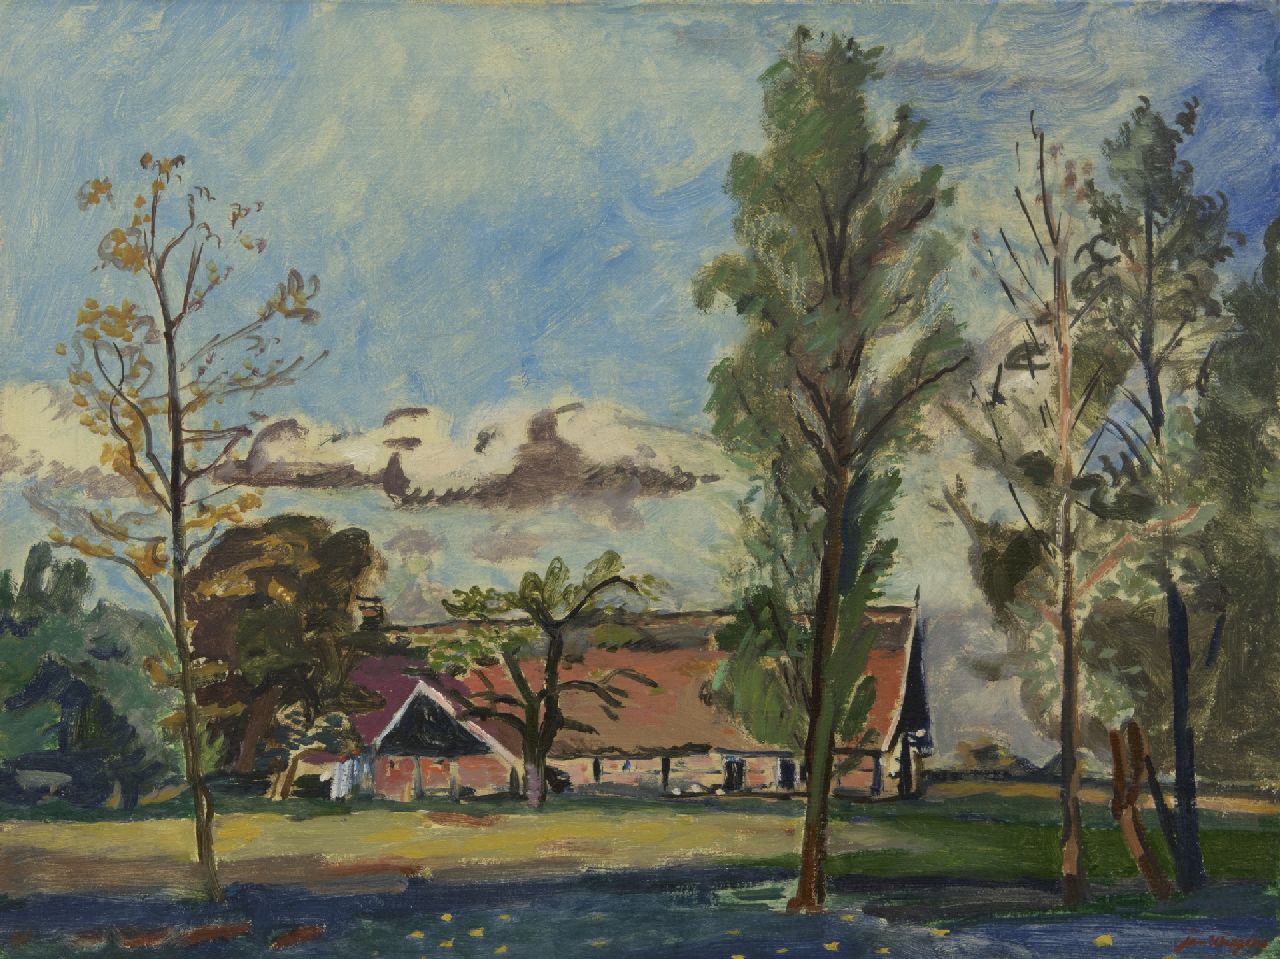 Wiegers J.  | Jan Wiegers | Paintings offered for sale | A farm in Saasveld, Twente, oil on canvas 46.6 x 61.2 cm, signed l.r. and dated '40